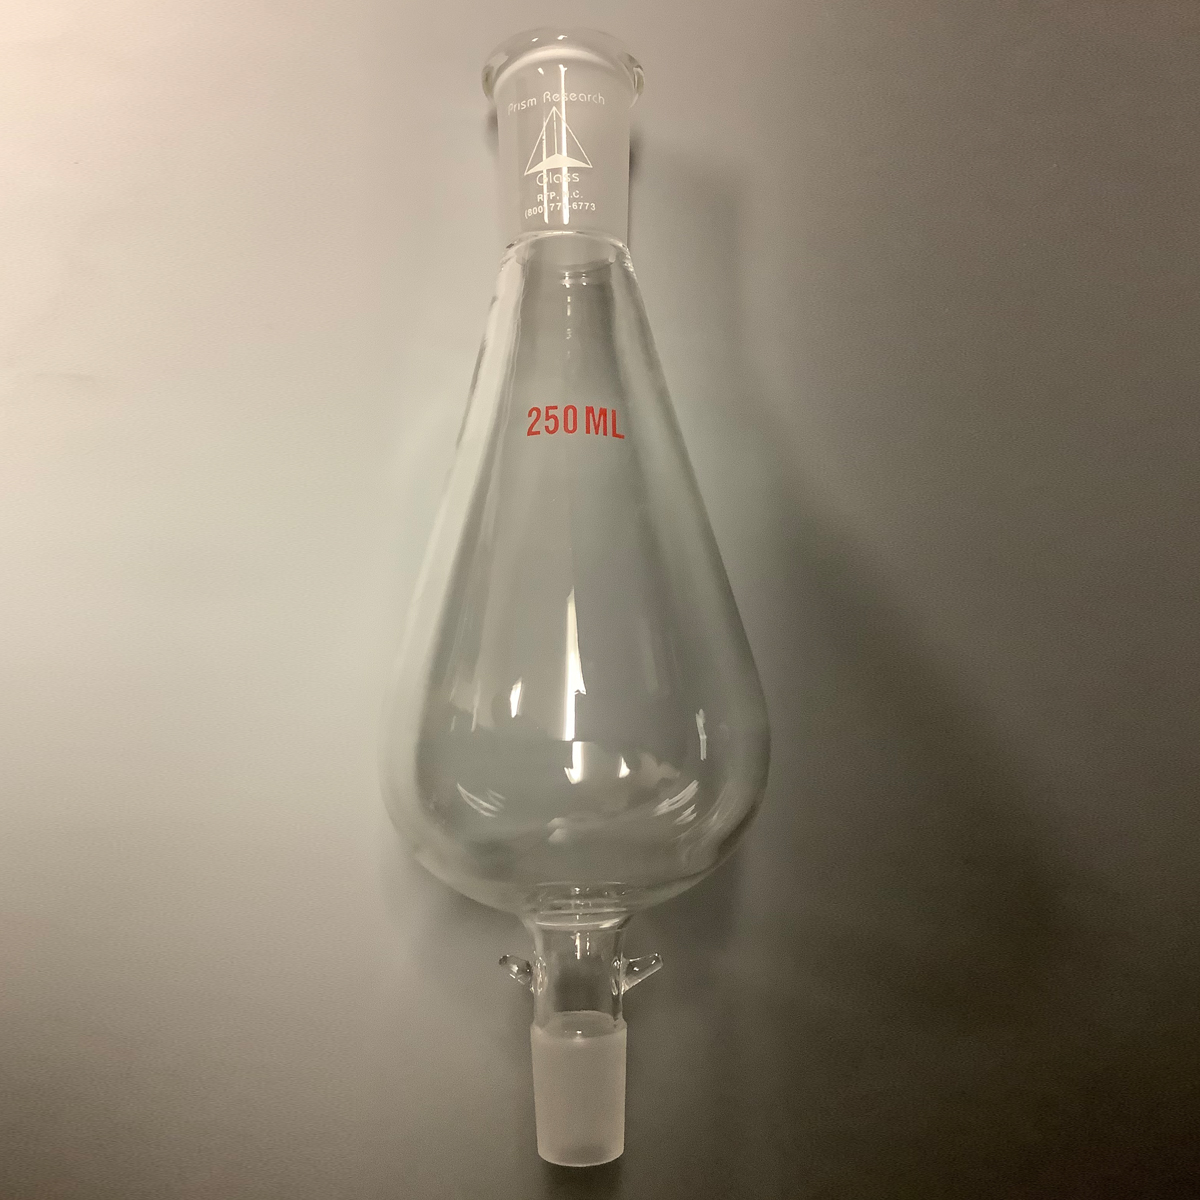 Kuderna-Danish Flask, with Hooks, 24/40 Top Joint 19/22 Lower Joint - Prism Research Glass